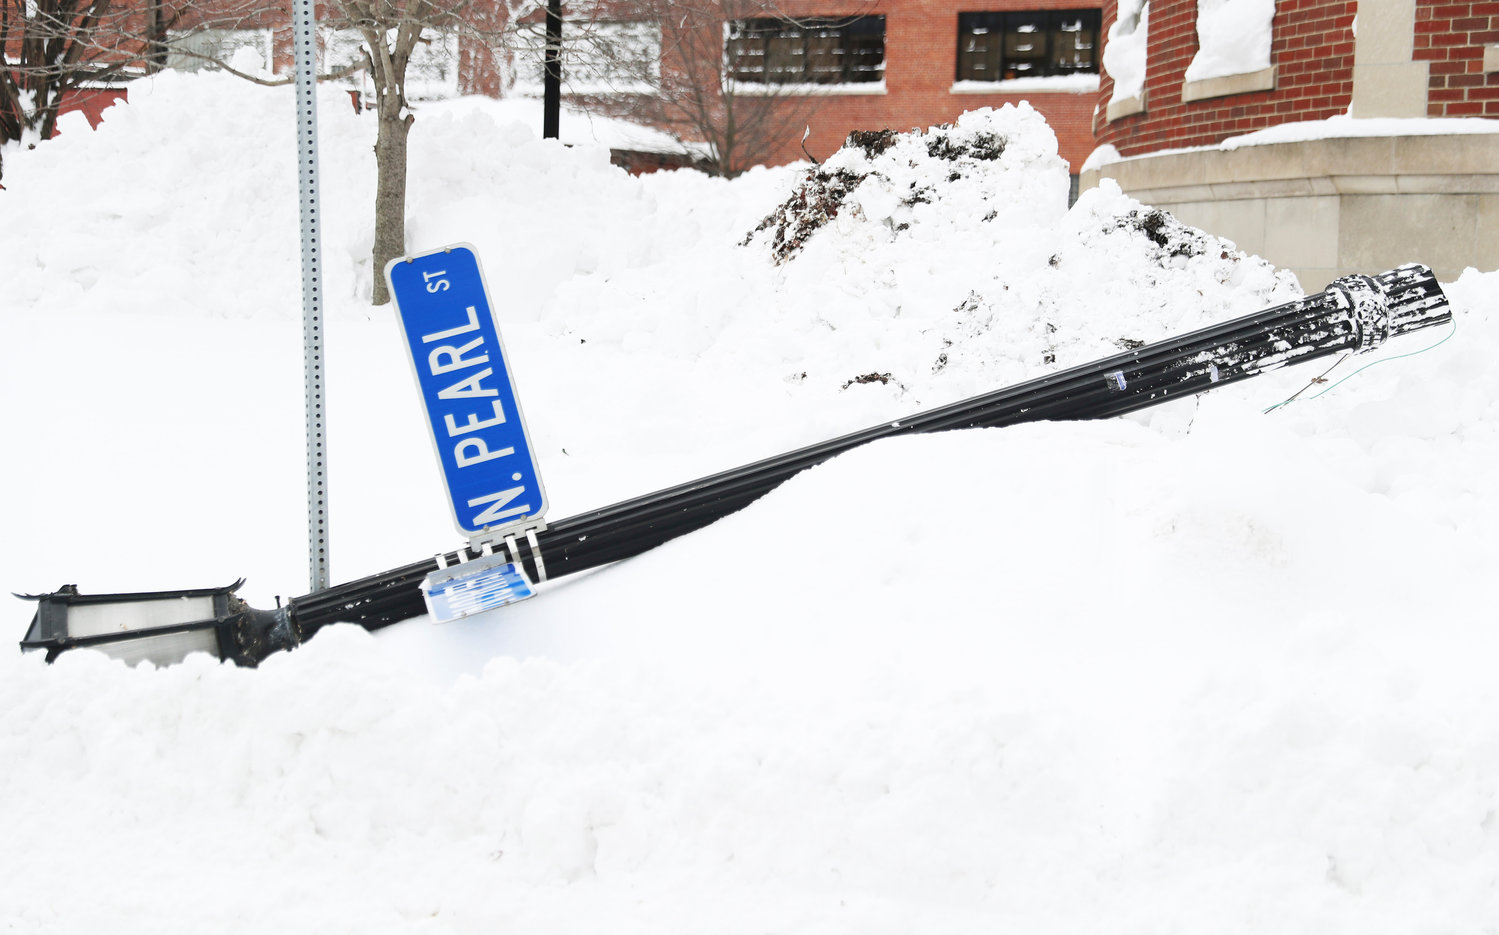 A North Pearl street sign is knocked down following heavy winds in Buffalo, N.Y., on Tuesday, Dec. 27, 2022. The wind was part of a blizzard that hit four Western New York counties. (Joseph Cooke/The Buffalo News via AP)